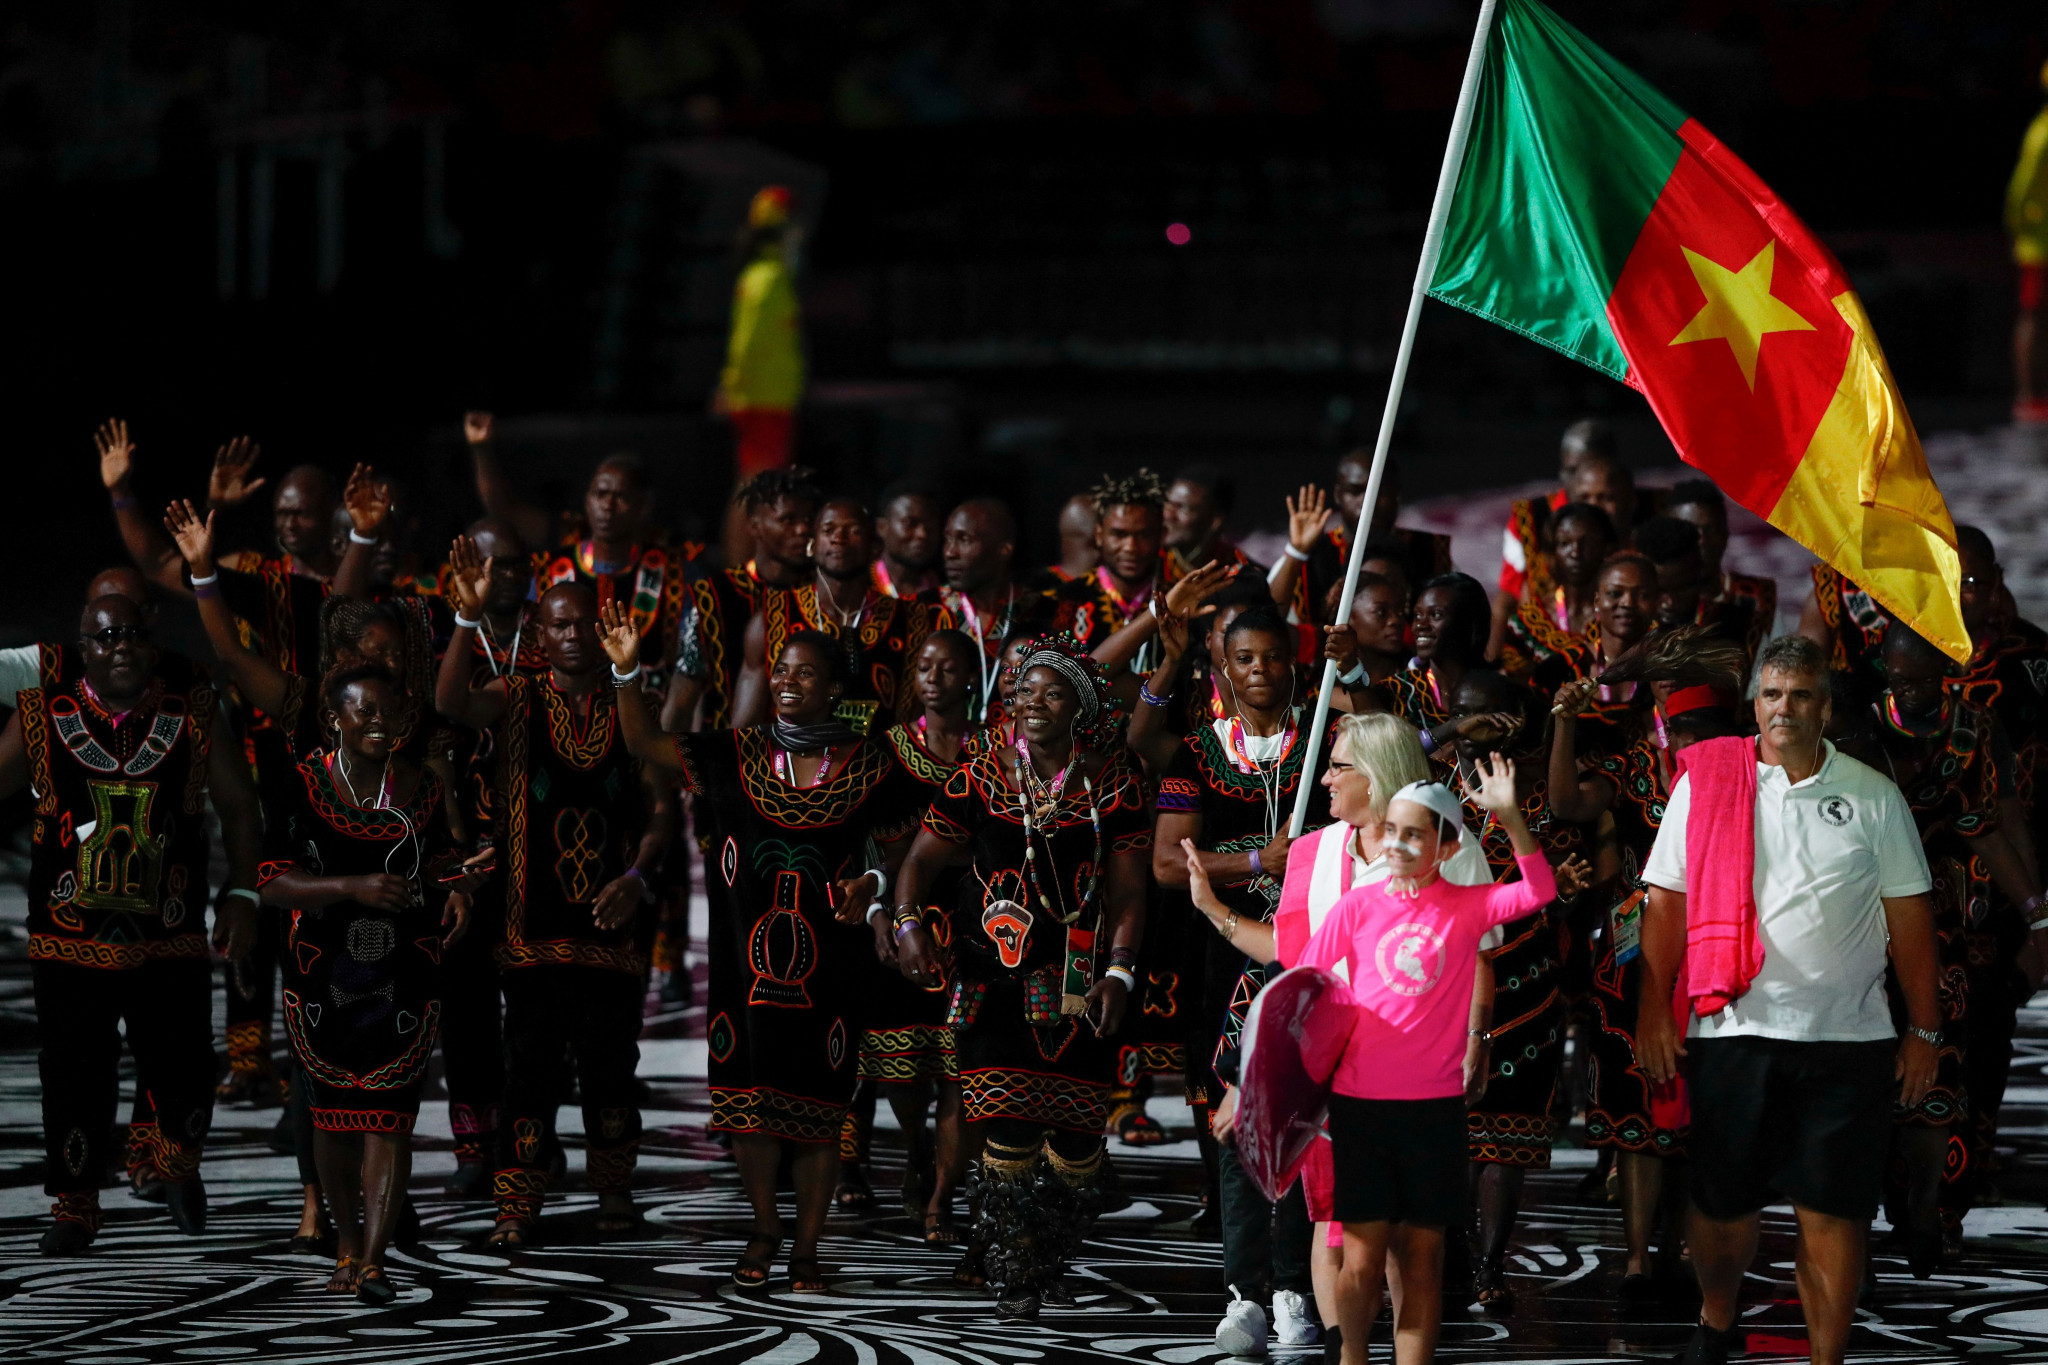 A third of the Cameroon team that competed at the 2018 Commonwealth Games in the Gold Coast disappeared after the event ©Getty Images